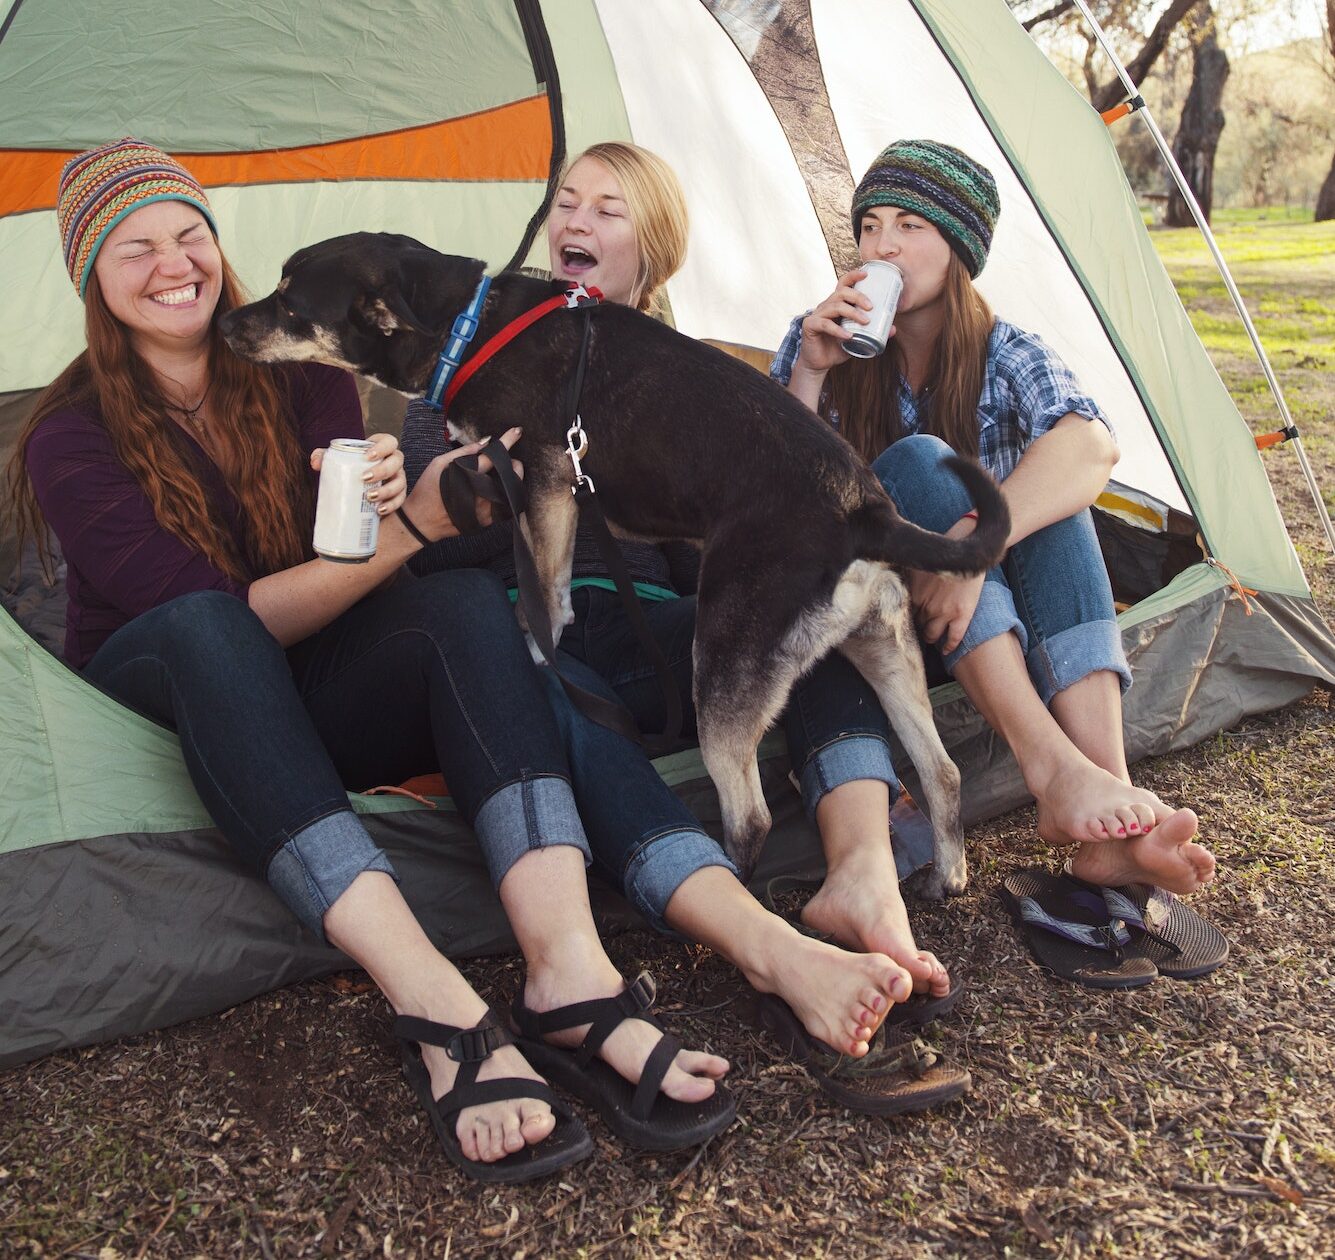 Cheerful Women Enjoying With Dog At Camp Site